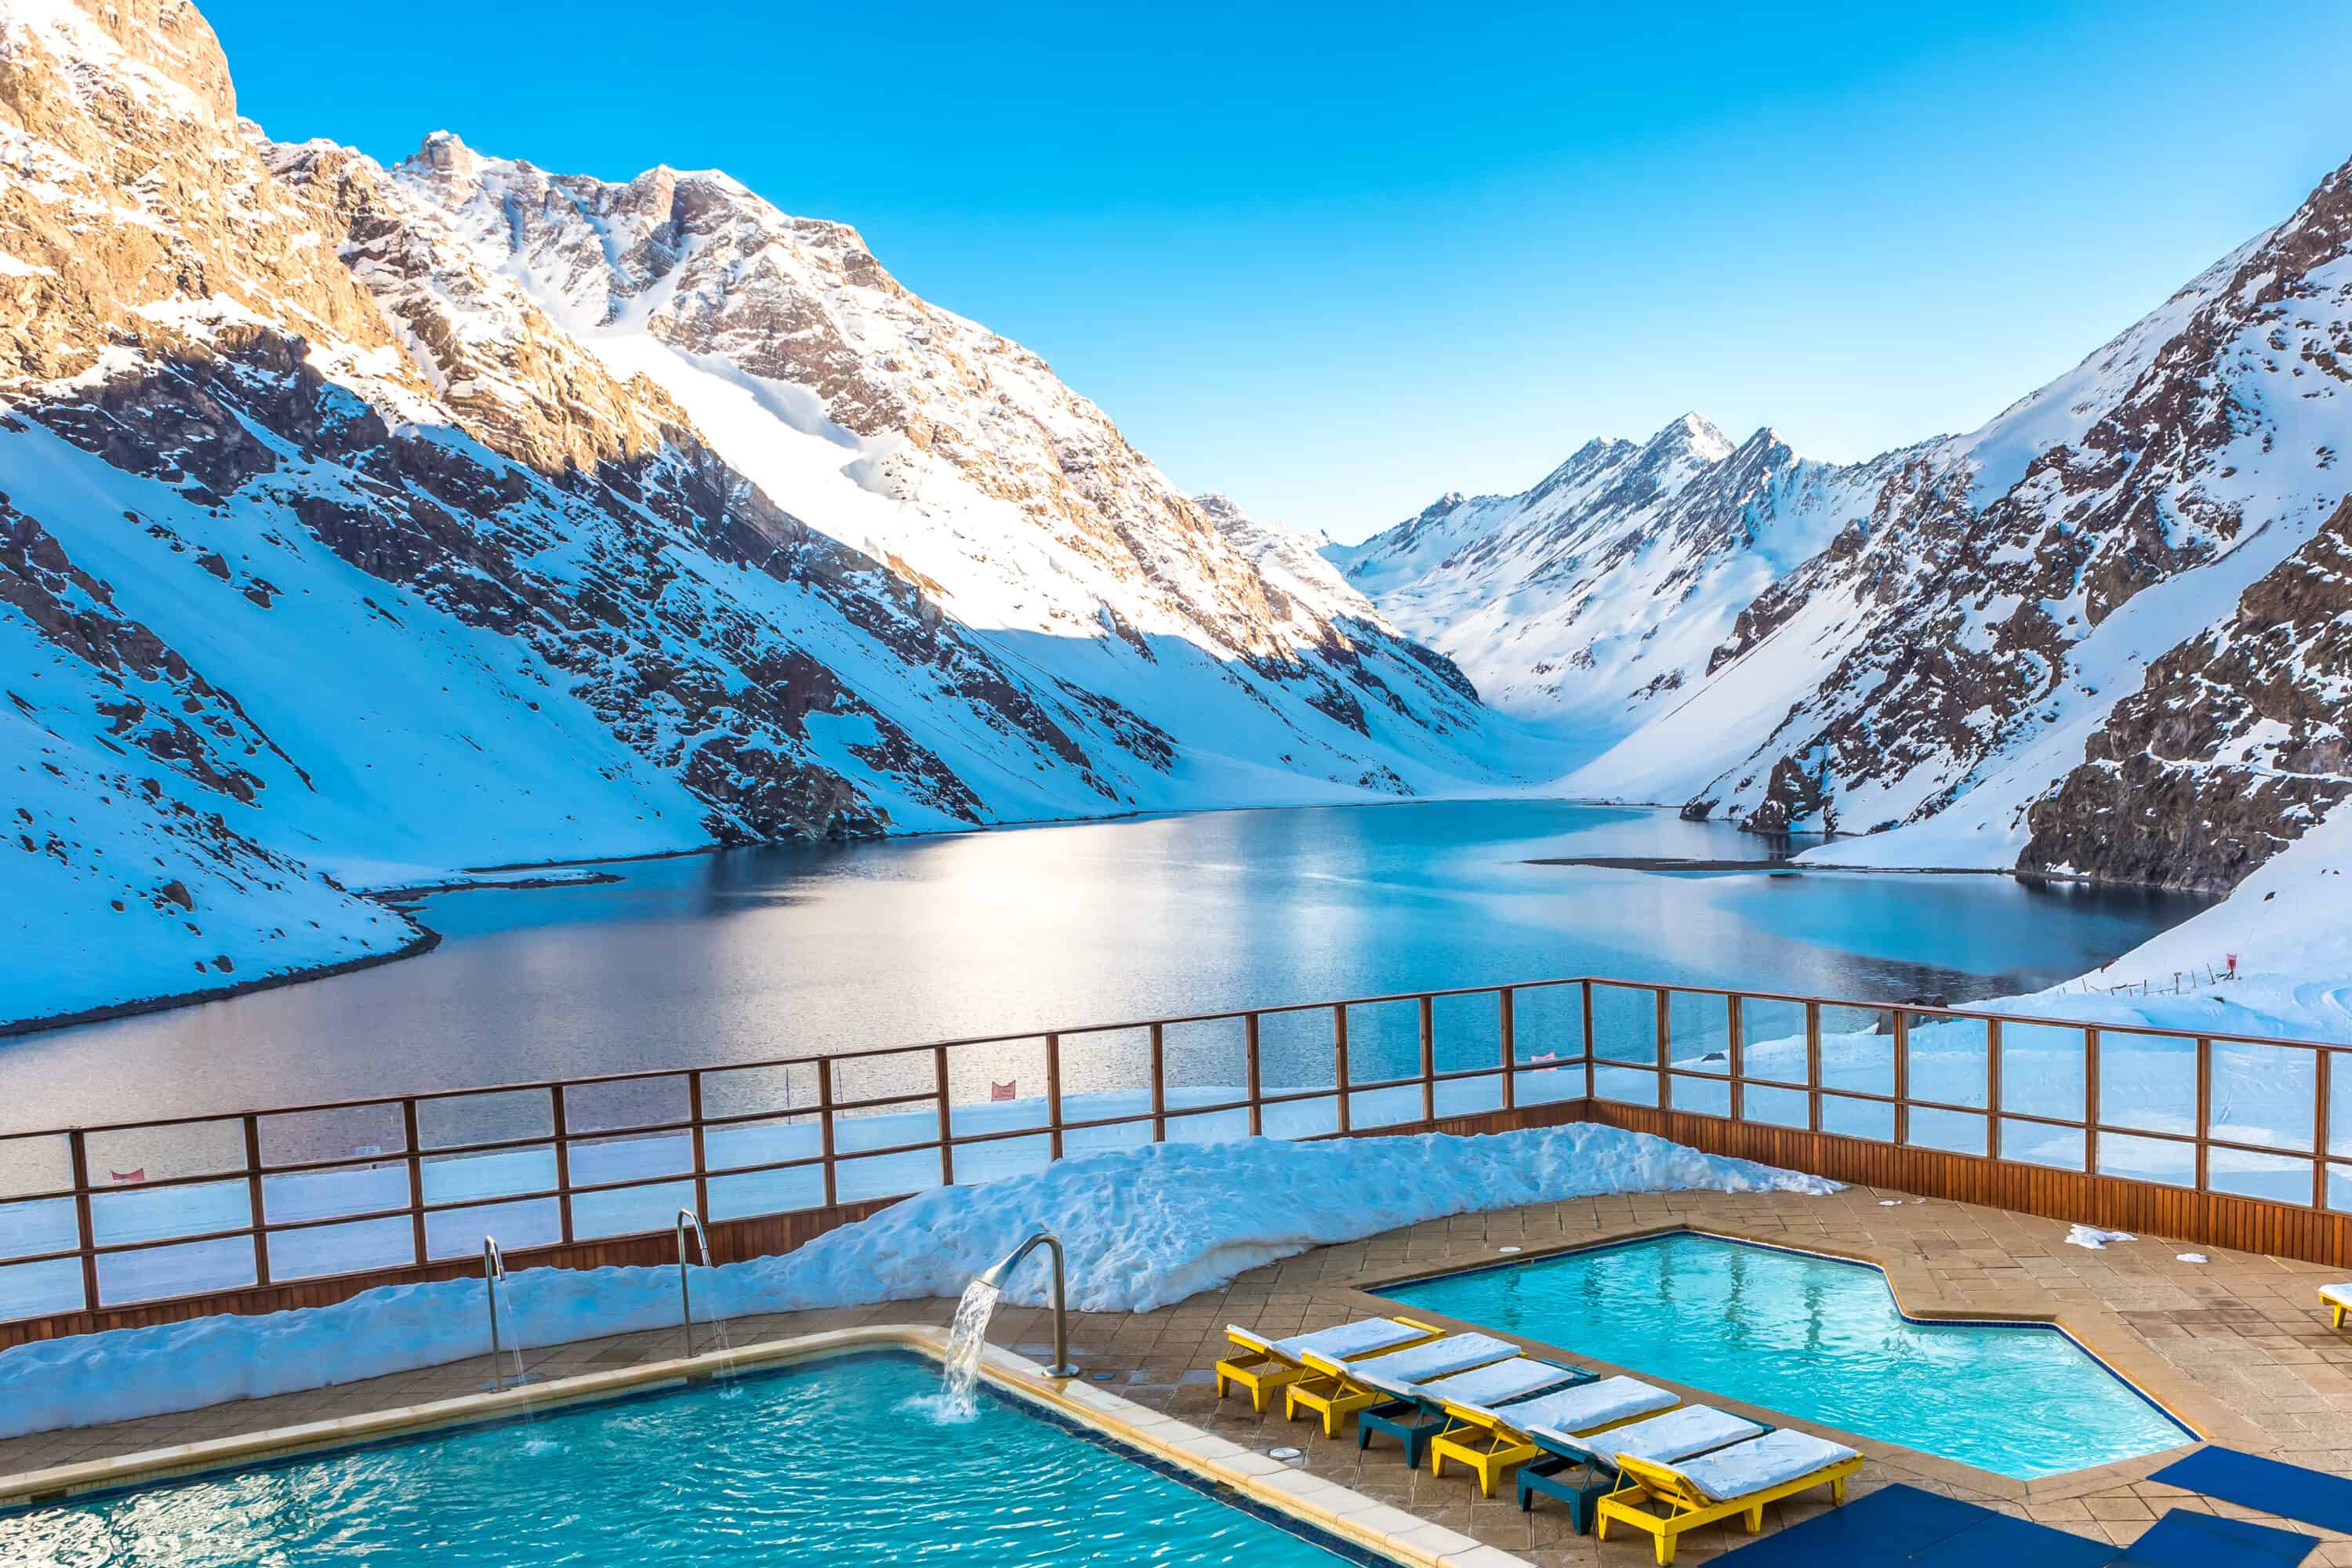 A pool right by a snowy mountain in Chile on a sunny day.